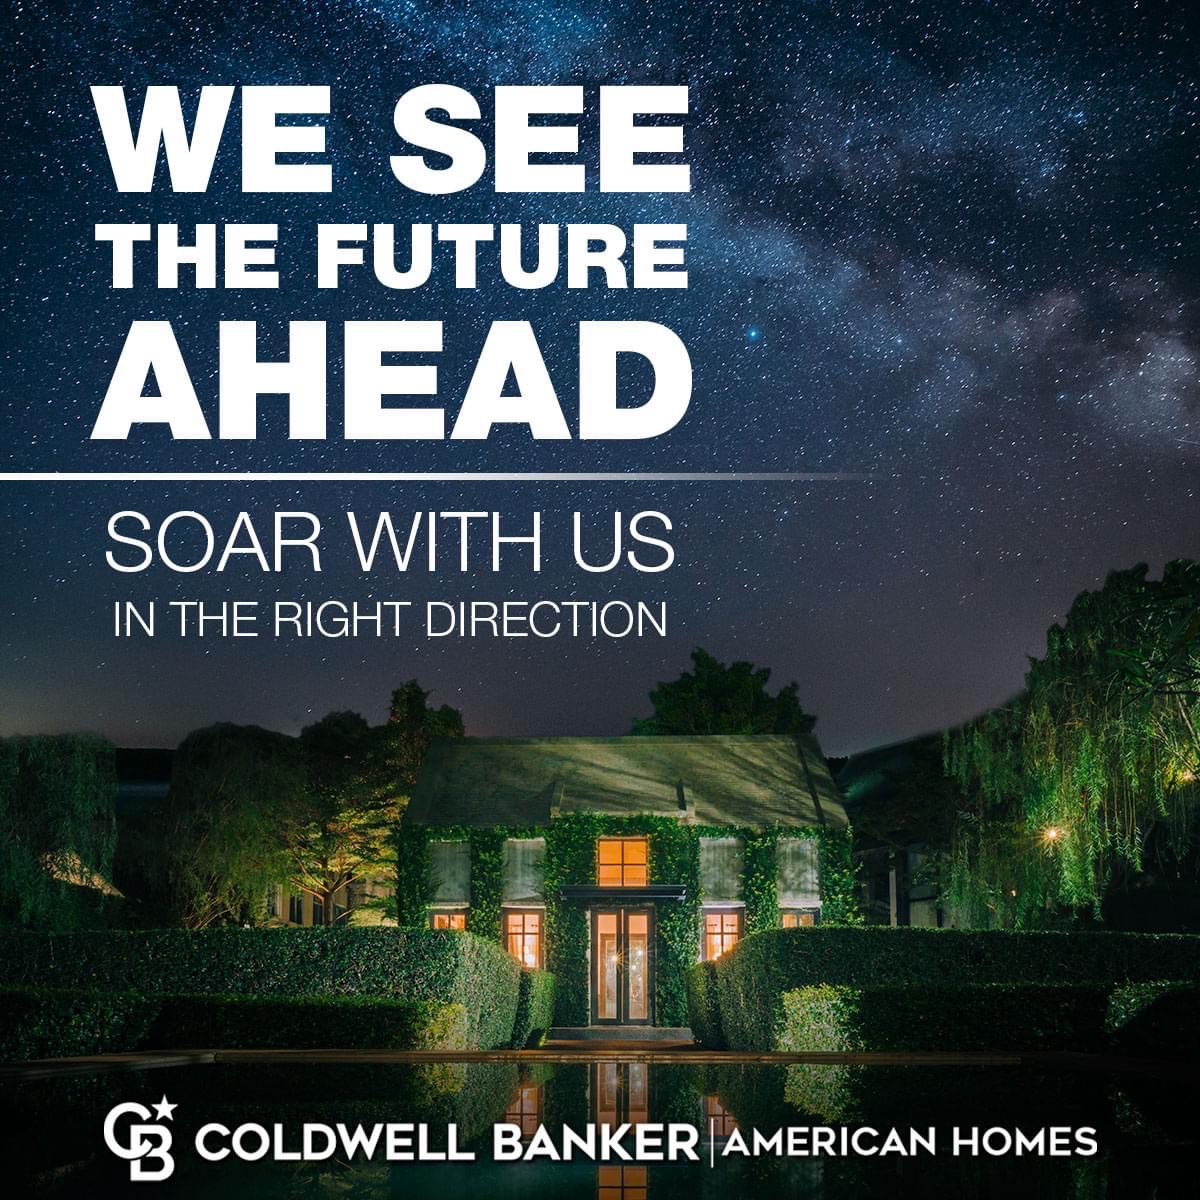 Unlock the door to your dream career and take flight toward a brighter future with us! Let our team guide you in the right direction and help you soar toward your real estate goals. 
#CBAmericanHomes #coldwellbanker #RealEstate #TheFutureIsNow #WeKnowRealEstate #RealEstateGoals